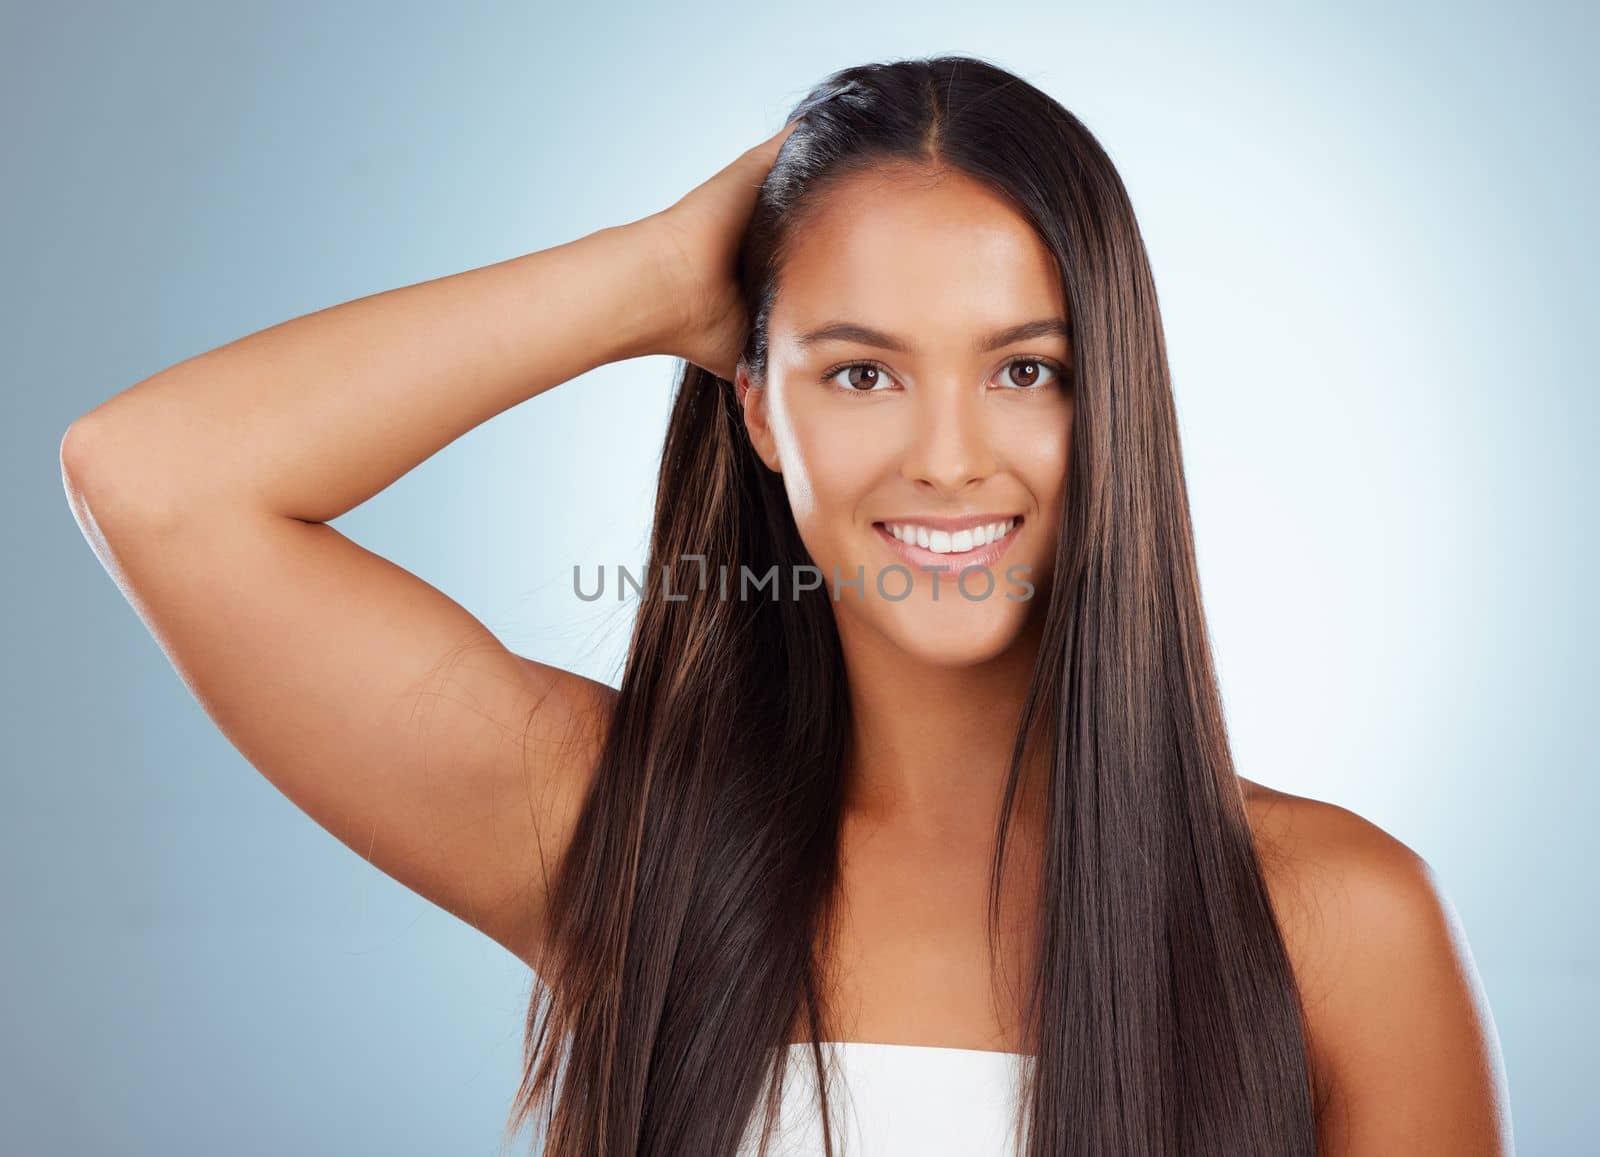 Portrait of a hispanic brunette woman with long lush beautiful hair smiling and posing against a grey studio background. Mixed race female standing showing her beautiful healthy hair.